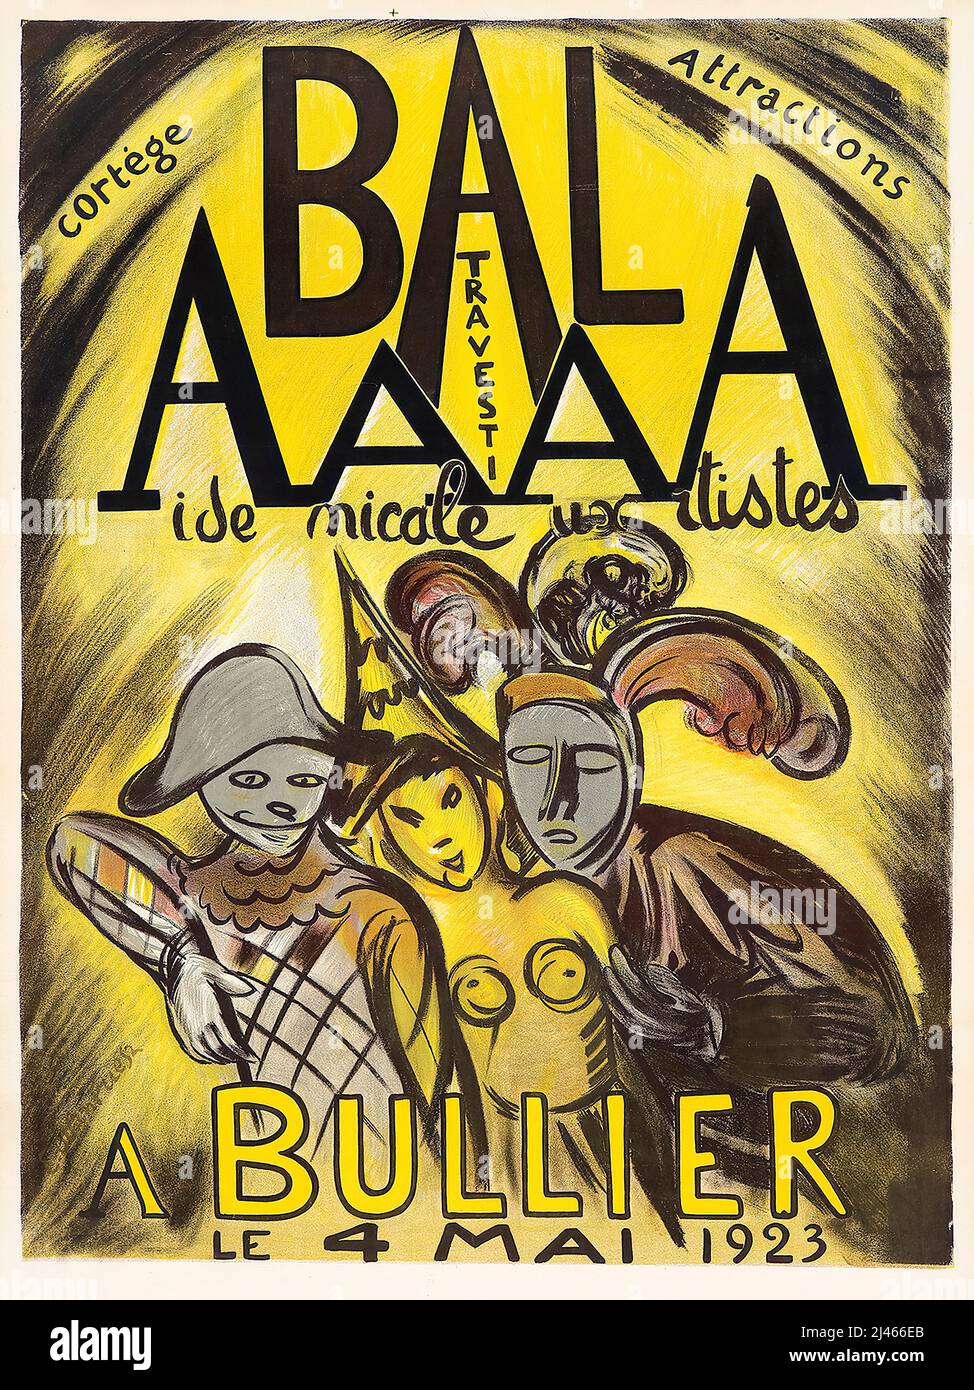 Poster advertising a Costume Ball in aid of Artists to be held at the Bullier Brasserie in Paris on the 4th May 1923, graphic design by Othon Friesz, 1923 Stock Photo